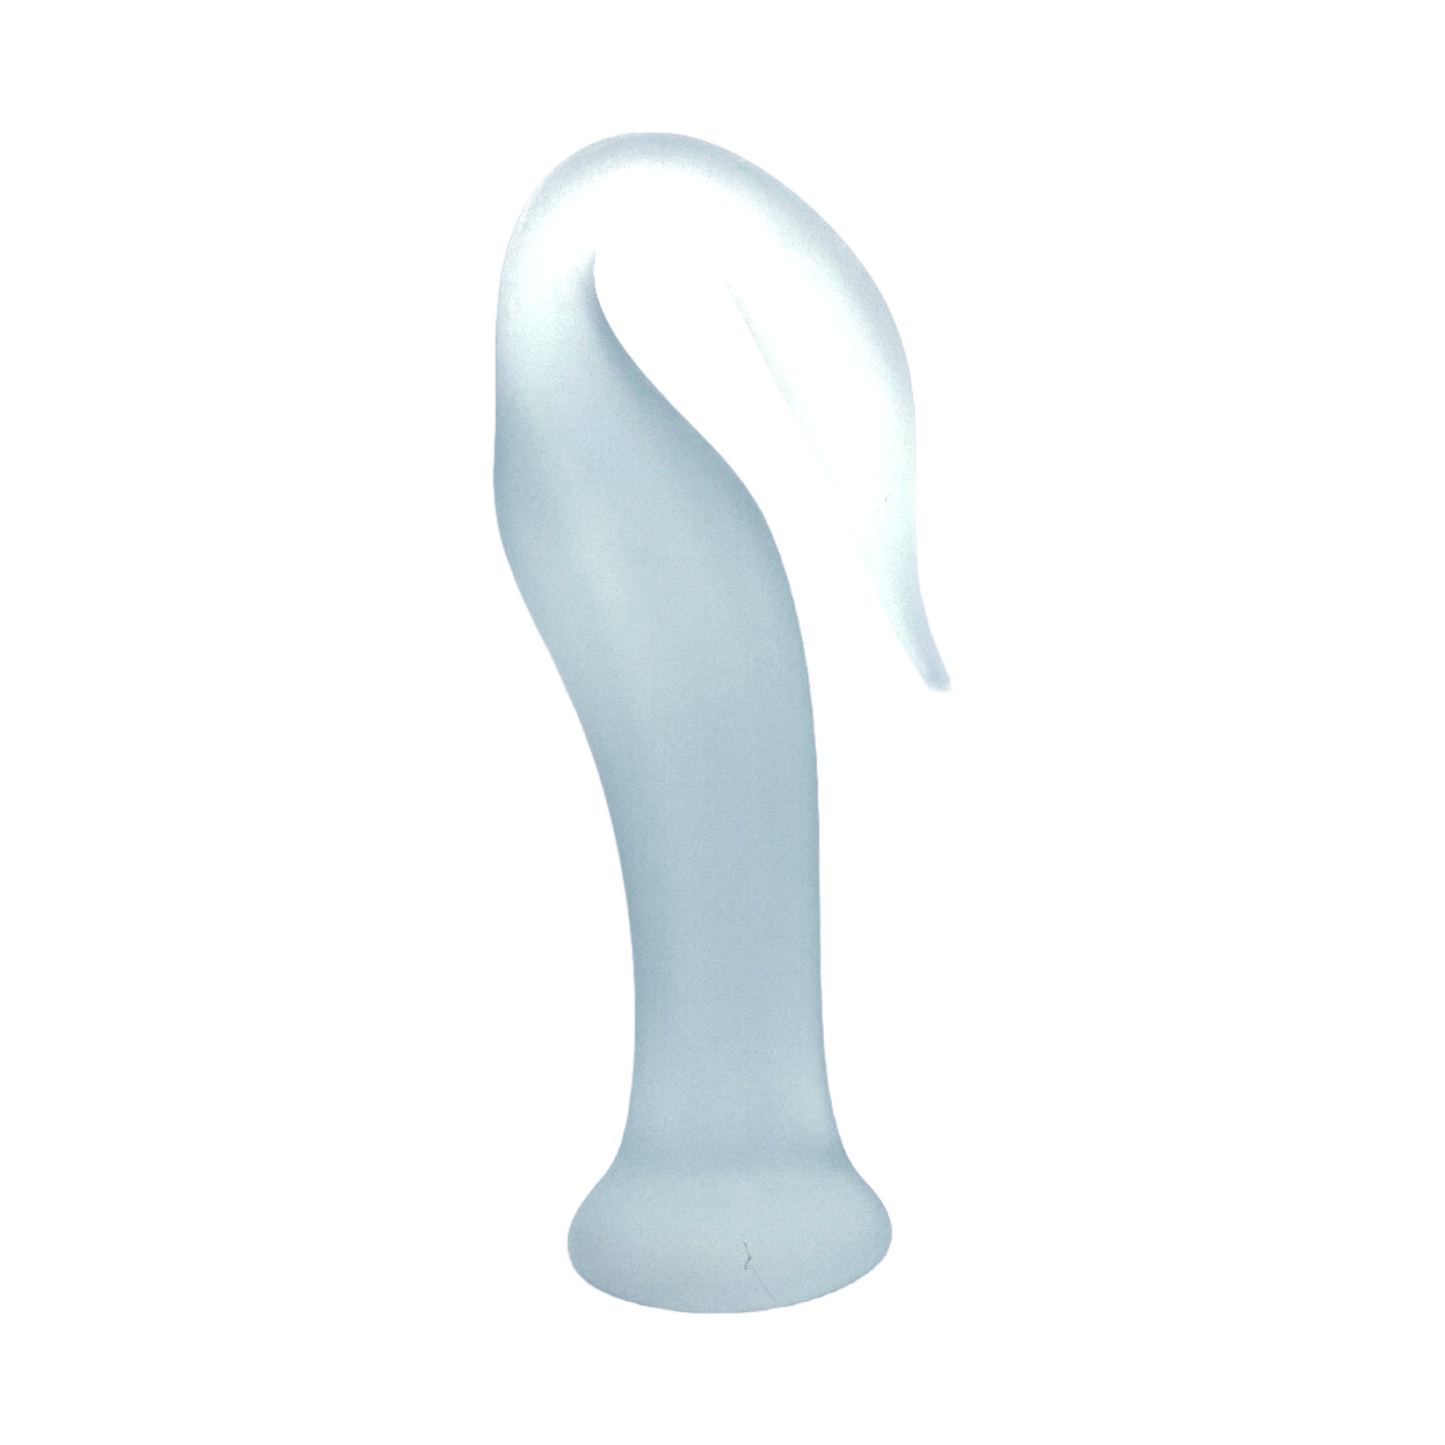 Ethereal Elegance: Handcrafted 15" Frosted Glass Swan